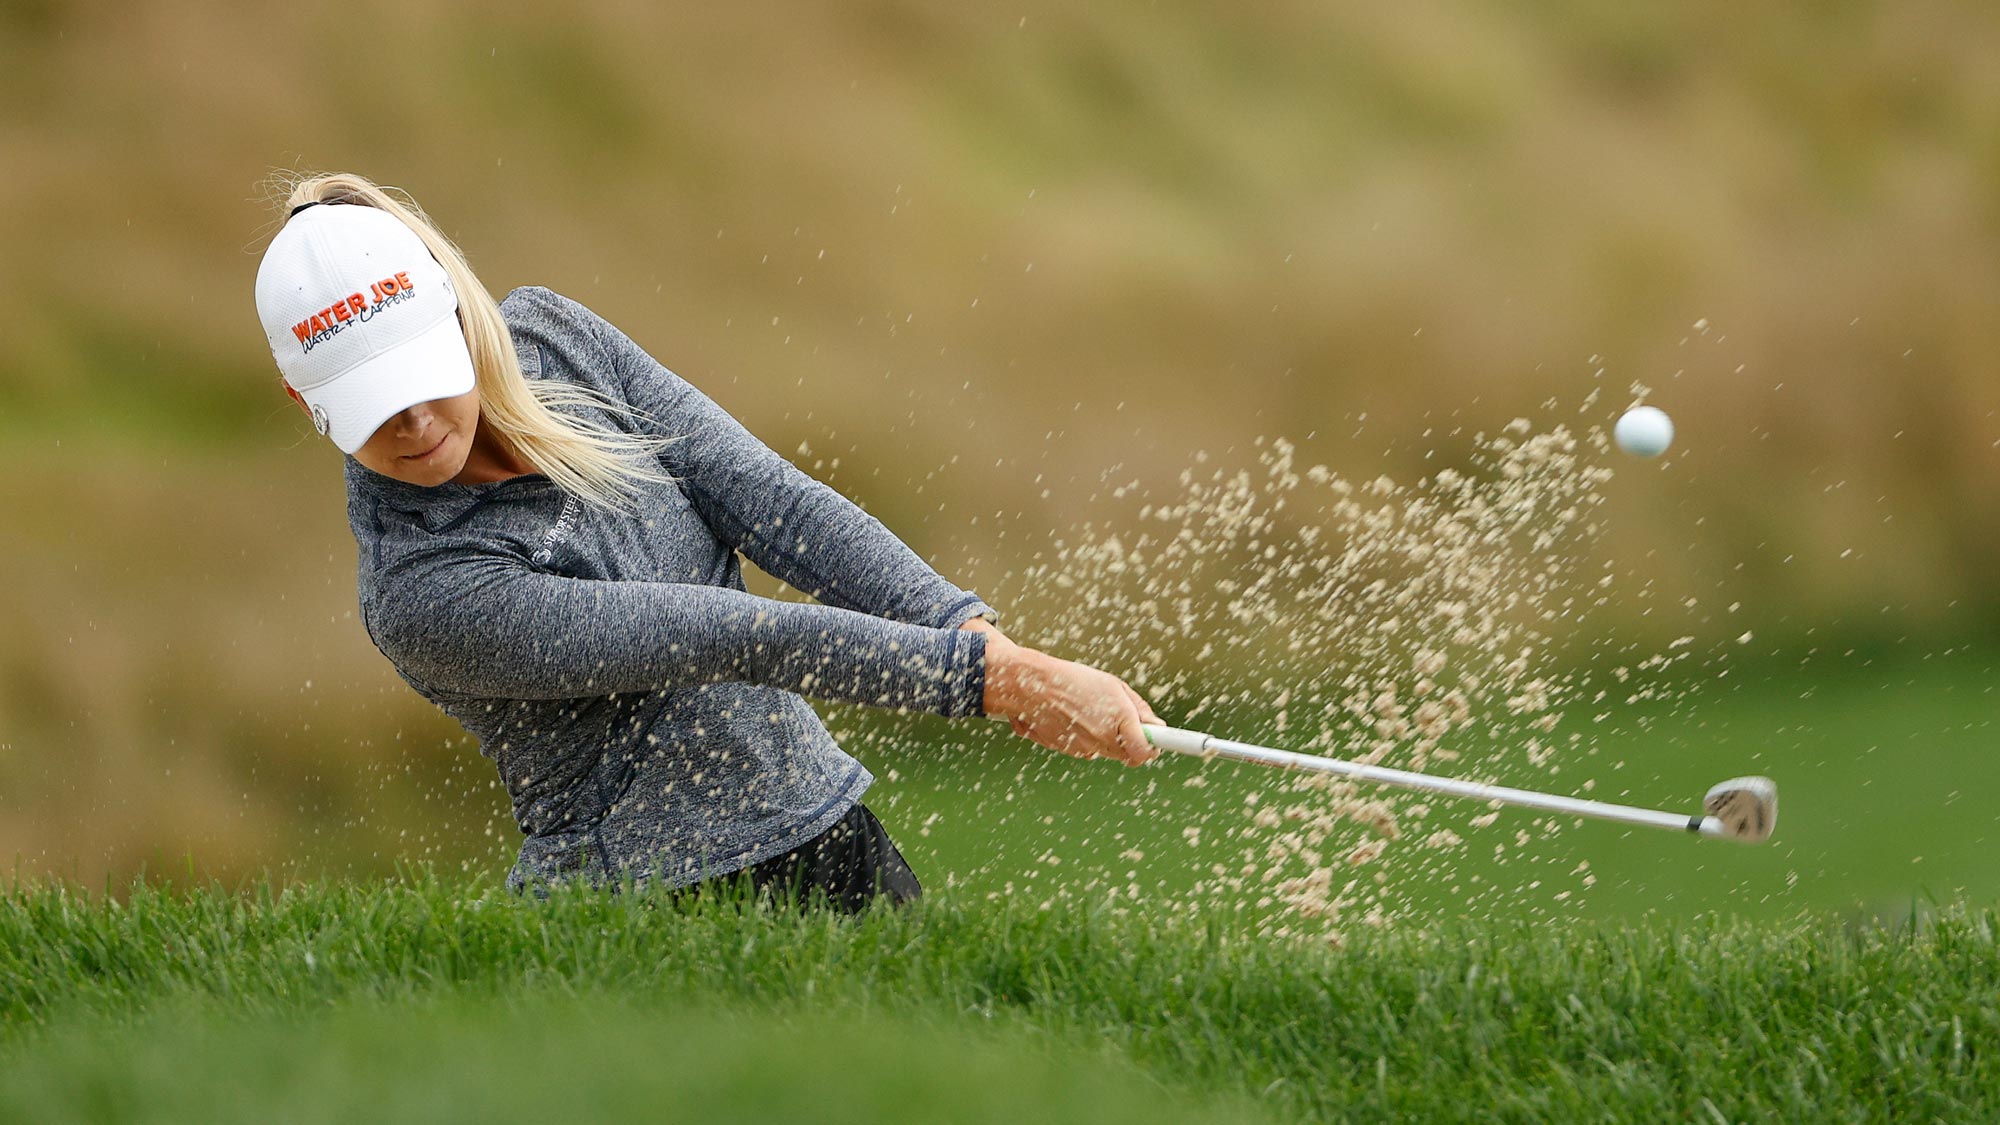 Sarah Burnham plays a shot from a bunker on the 12th hole during the final round of the LPGA Drive On Championship